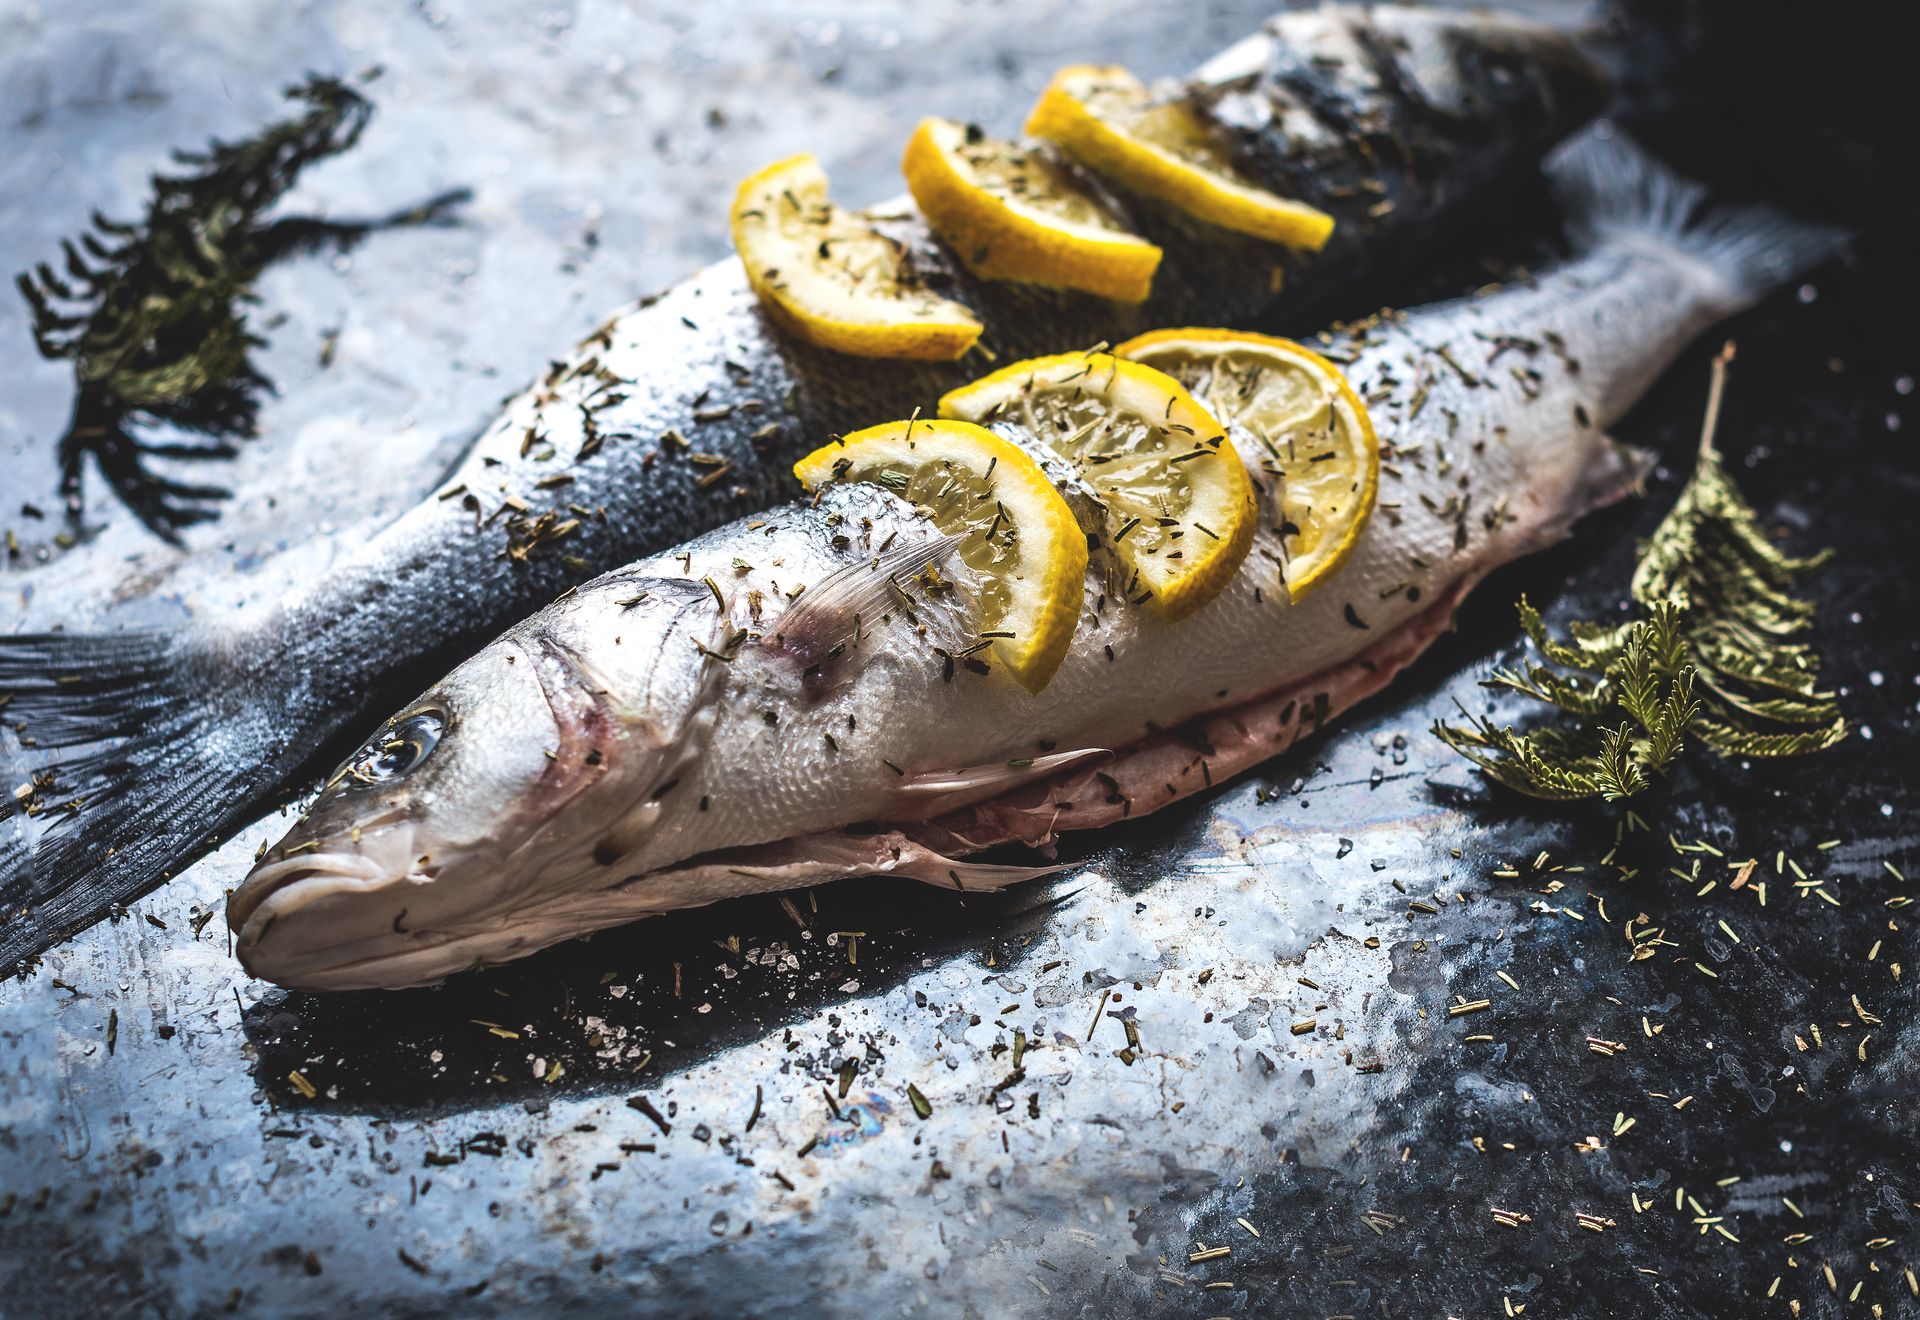 Grilling fish &#8211; a comprehensive guide 